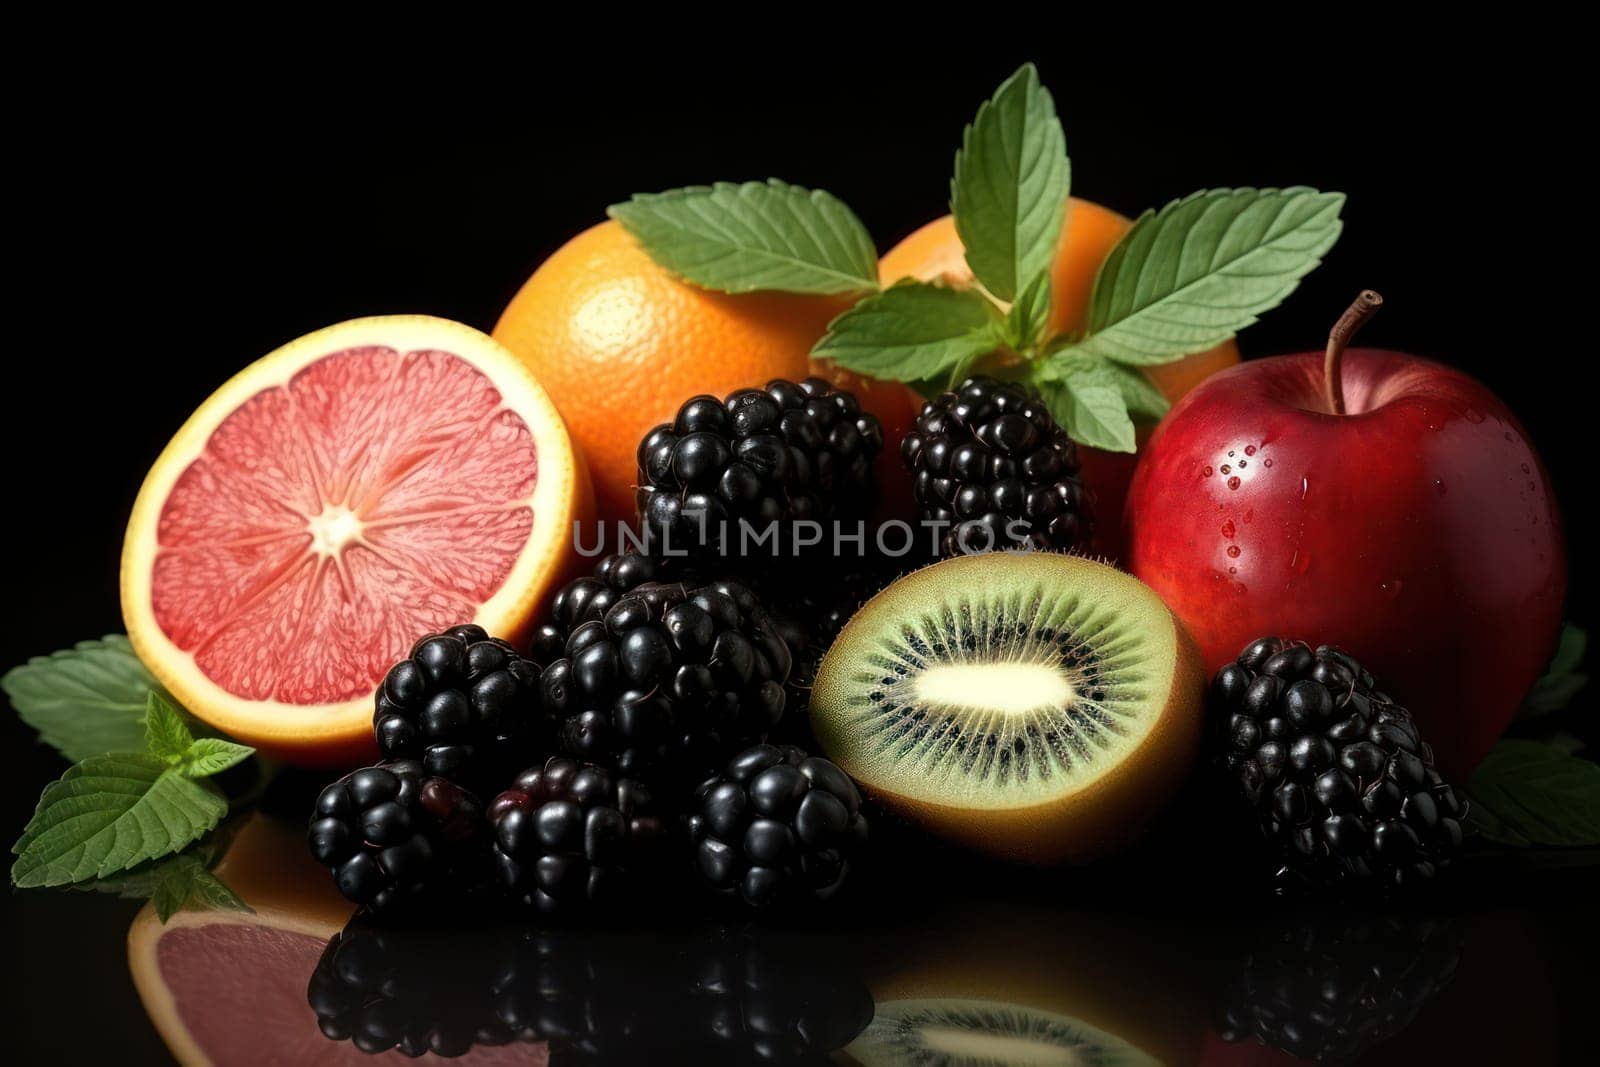 Juicy, Fresh Fruits on Colorful Background: A Vibrant Assortment of Healthy Vitamin-Packed Sweet Organic Nature in a Delicious, Exotic Collection